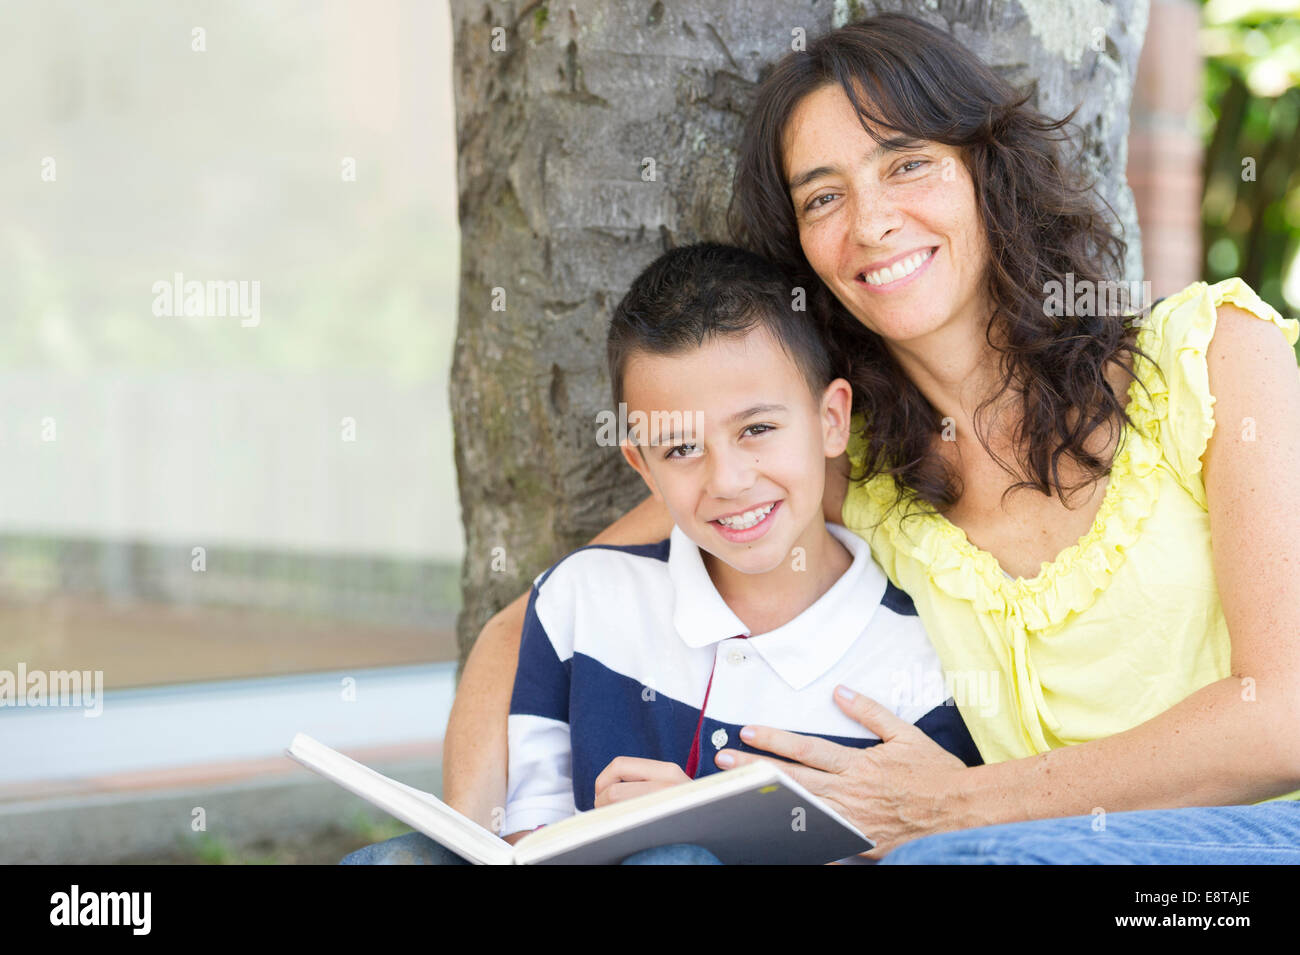 Hispanic mother and son reading book Stock Photo